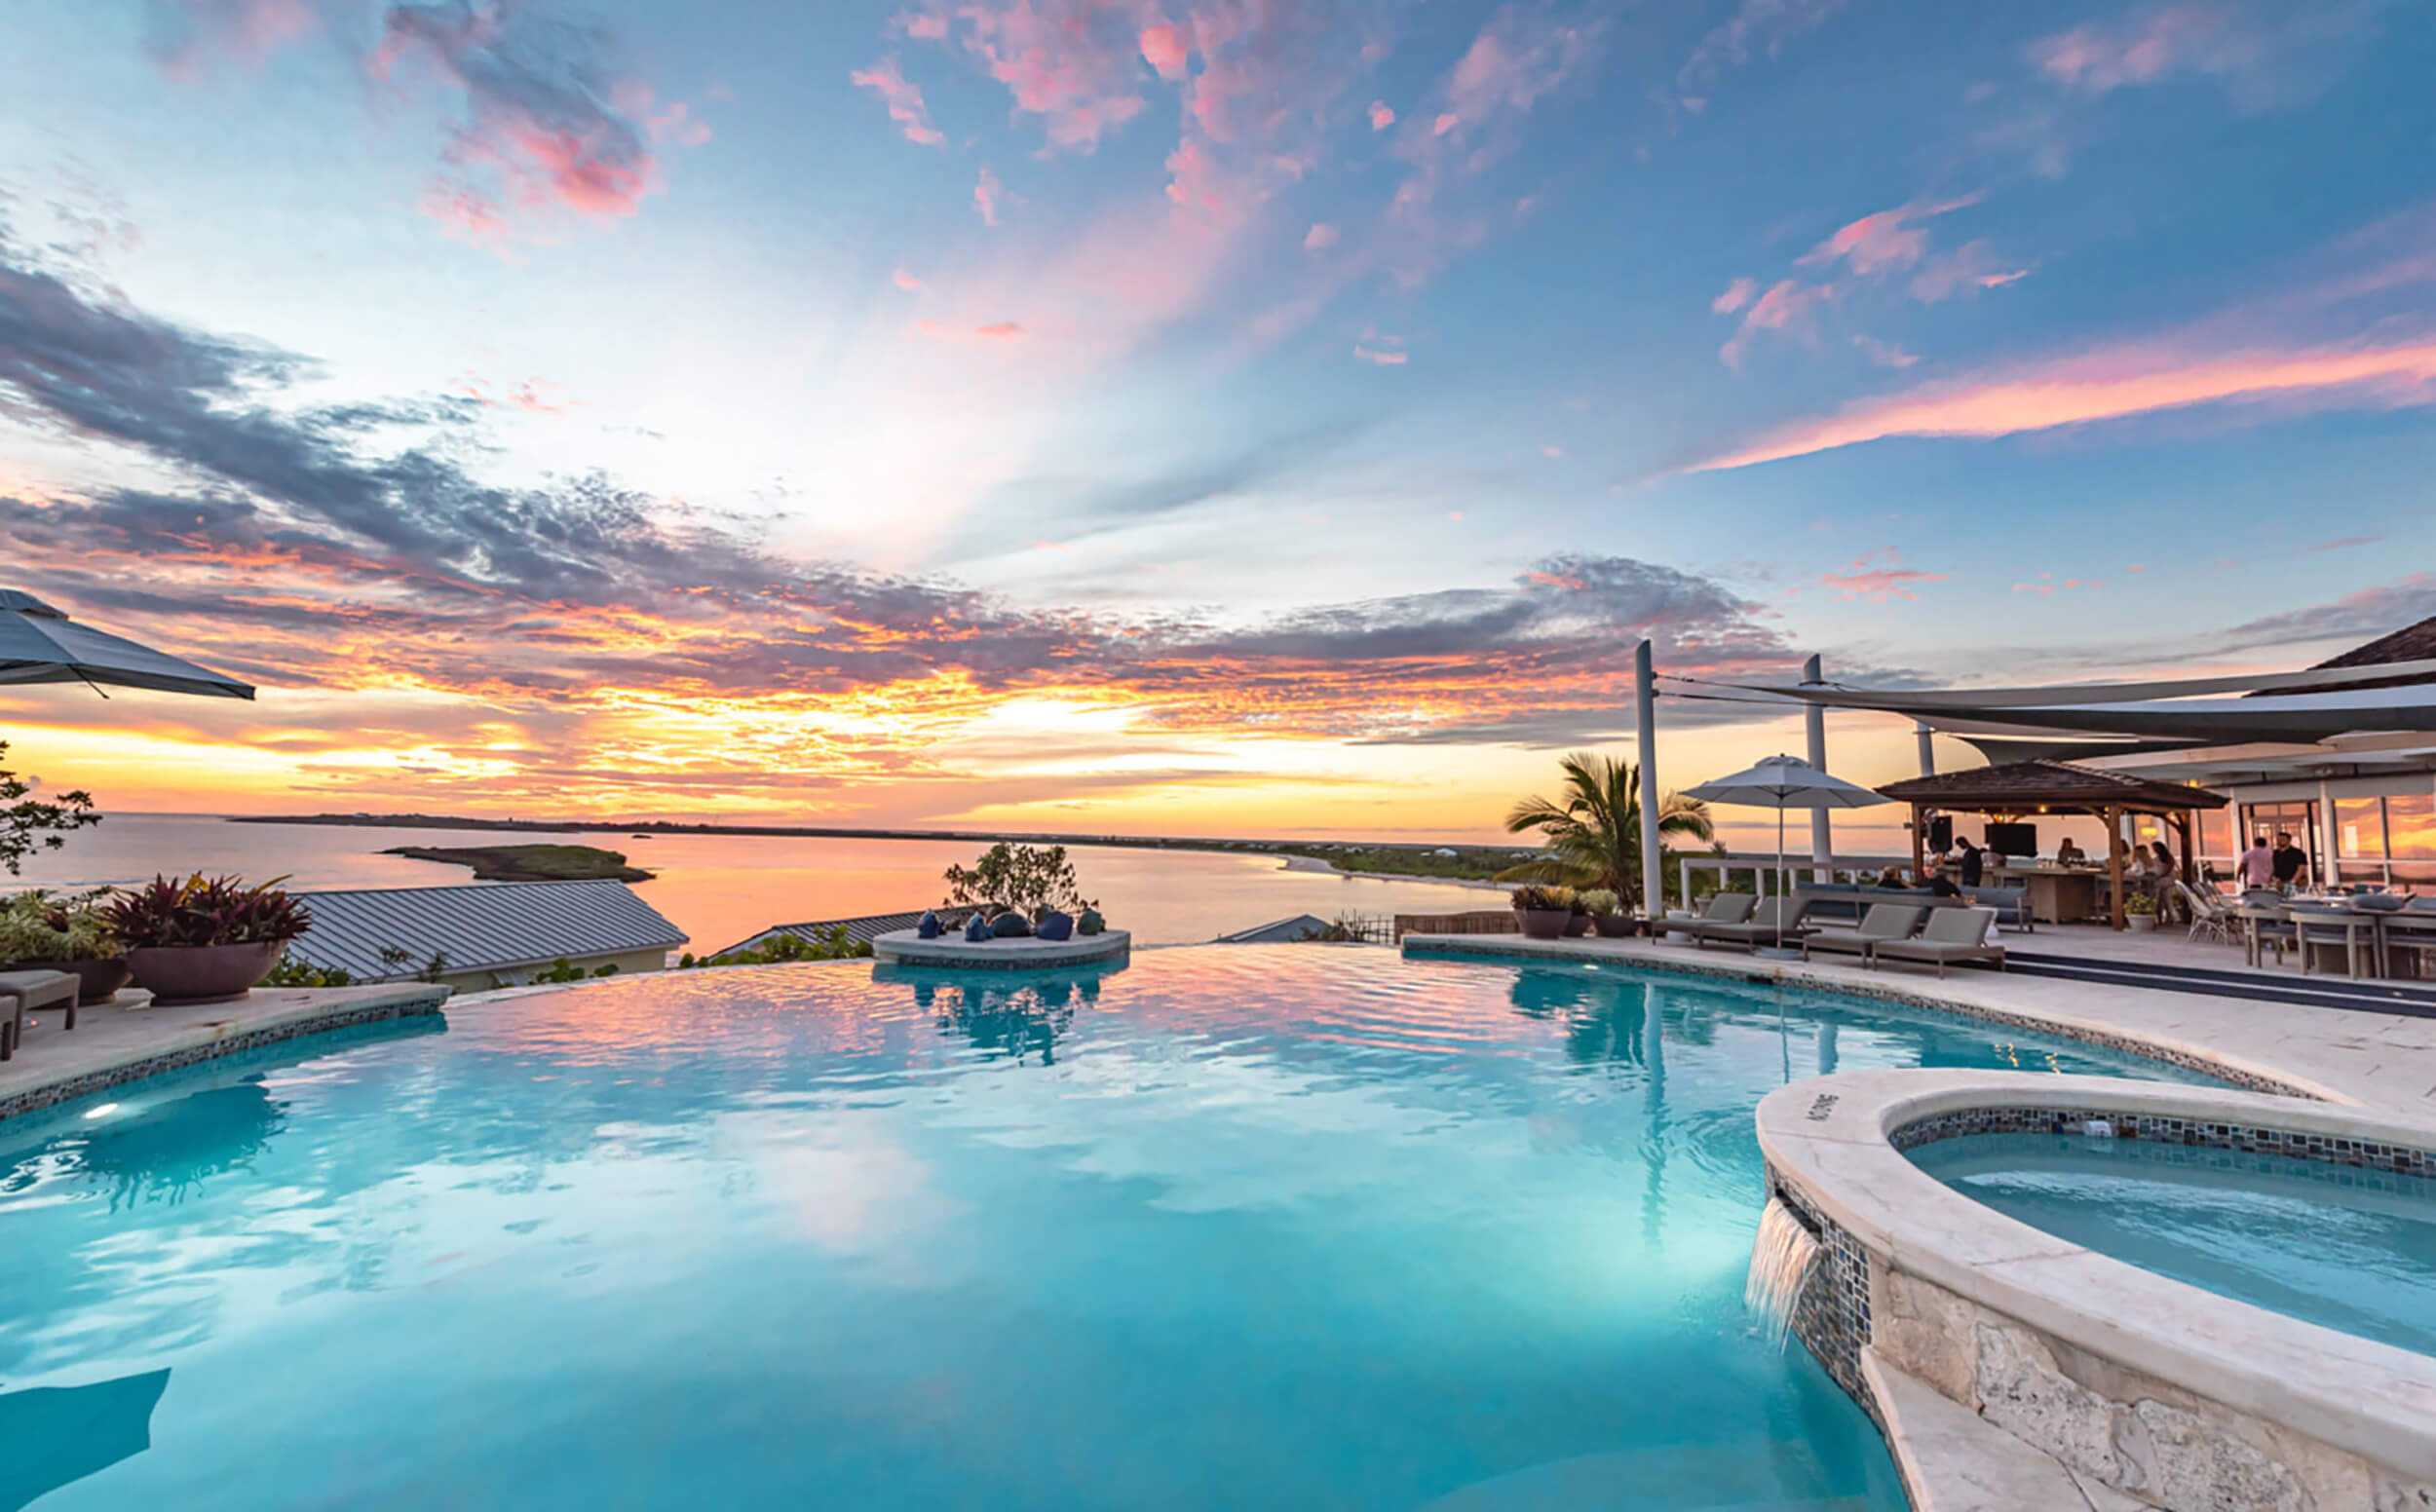 Sunset view at The Abaco Club showcasing a luxurious pool reflecting vibrant skies, embodying coastal living and club lifestyle